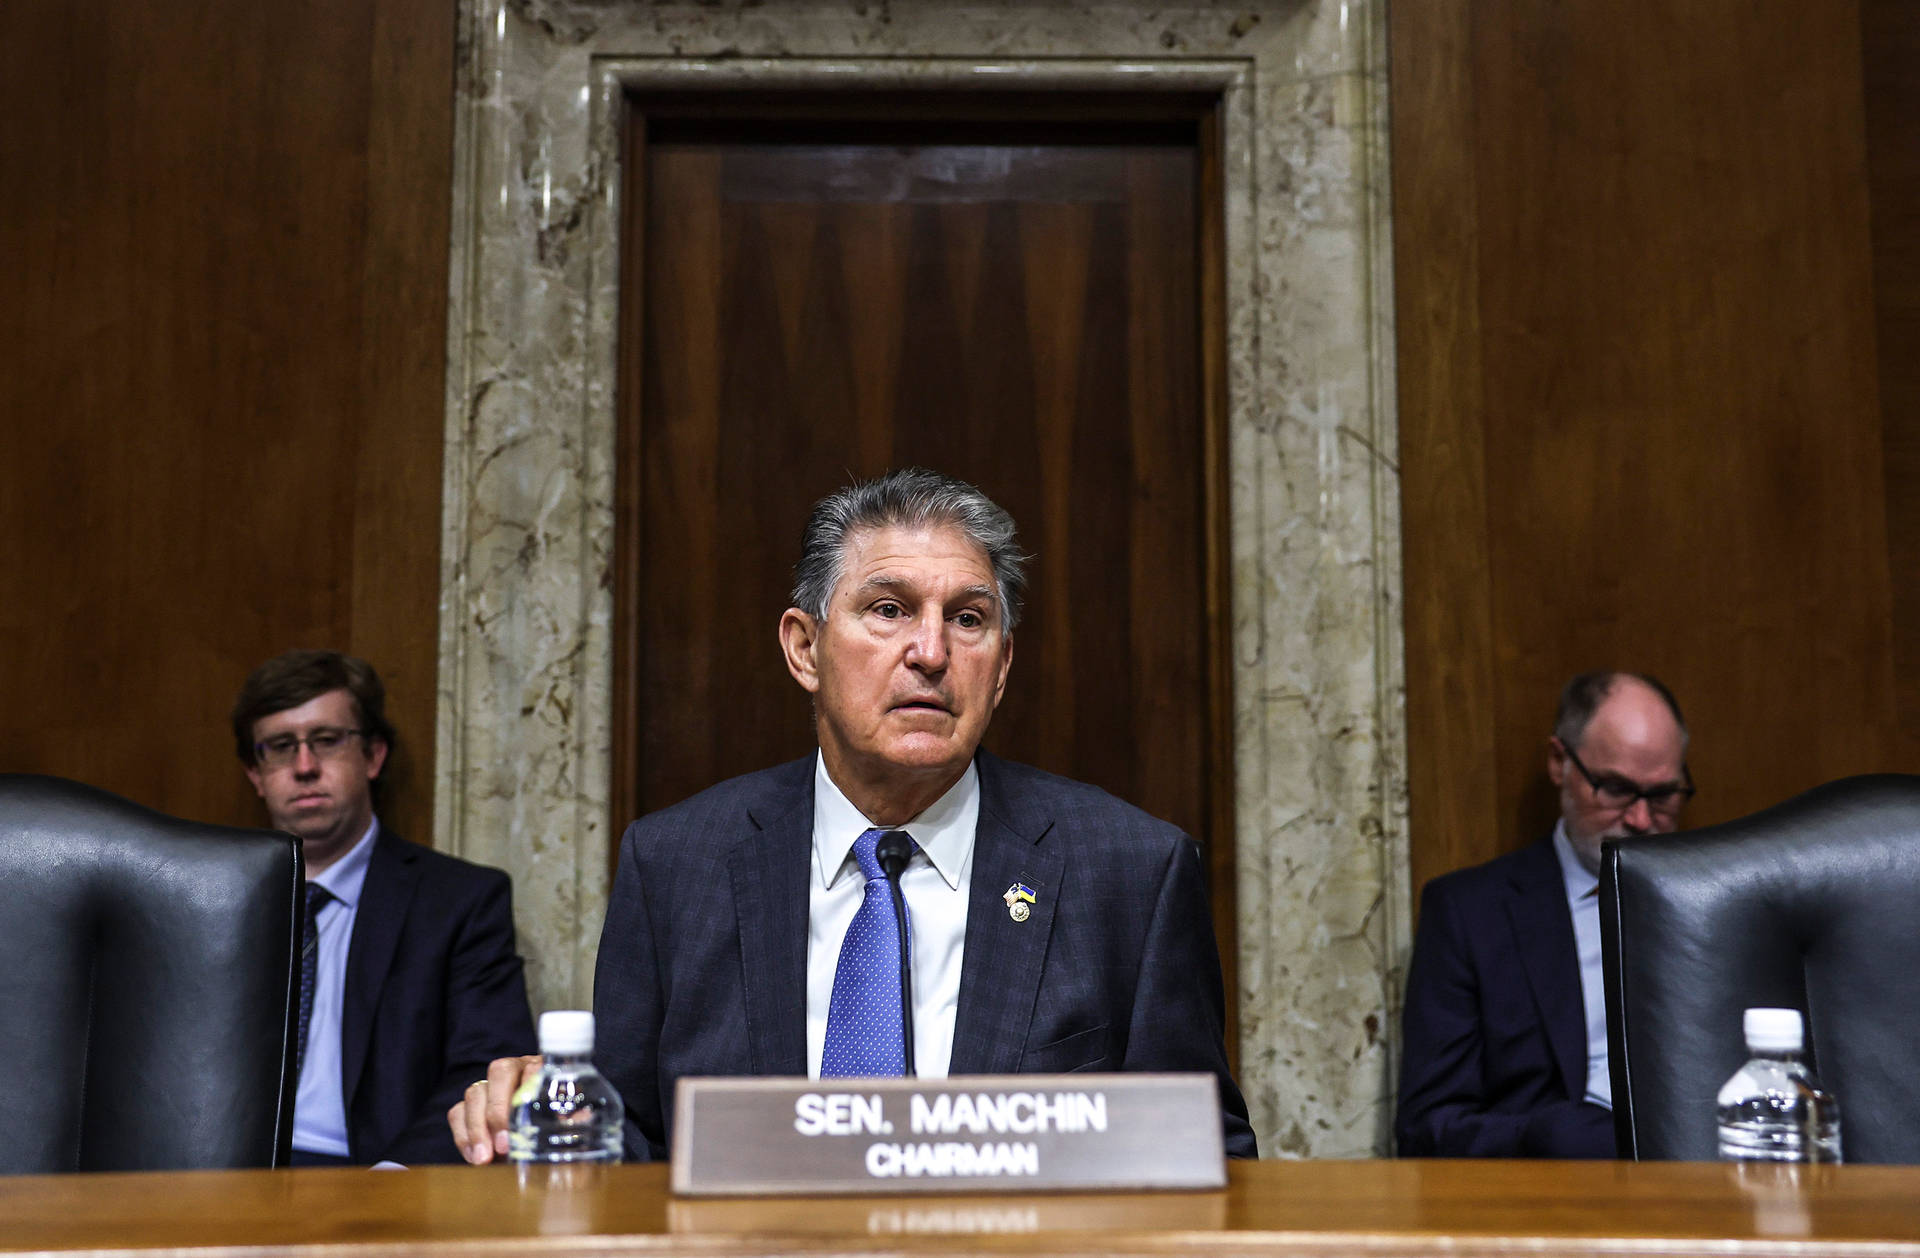 Joe Manchin And The Two Security Wallpaper